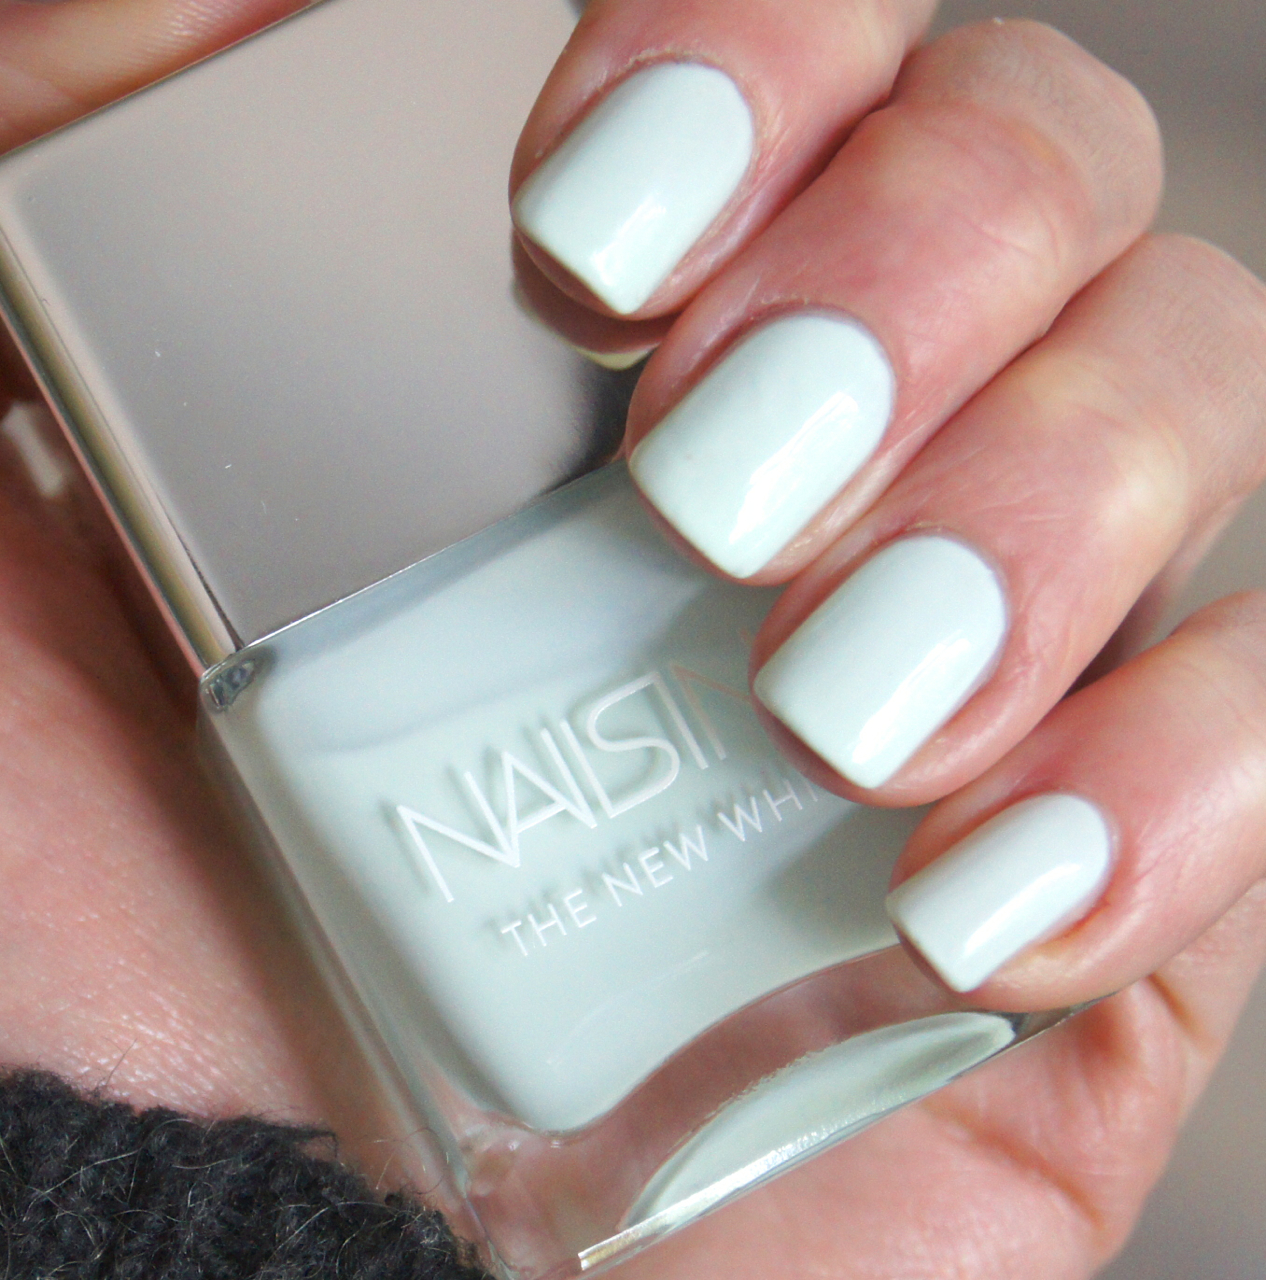 nails inc the new white swan street swatch